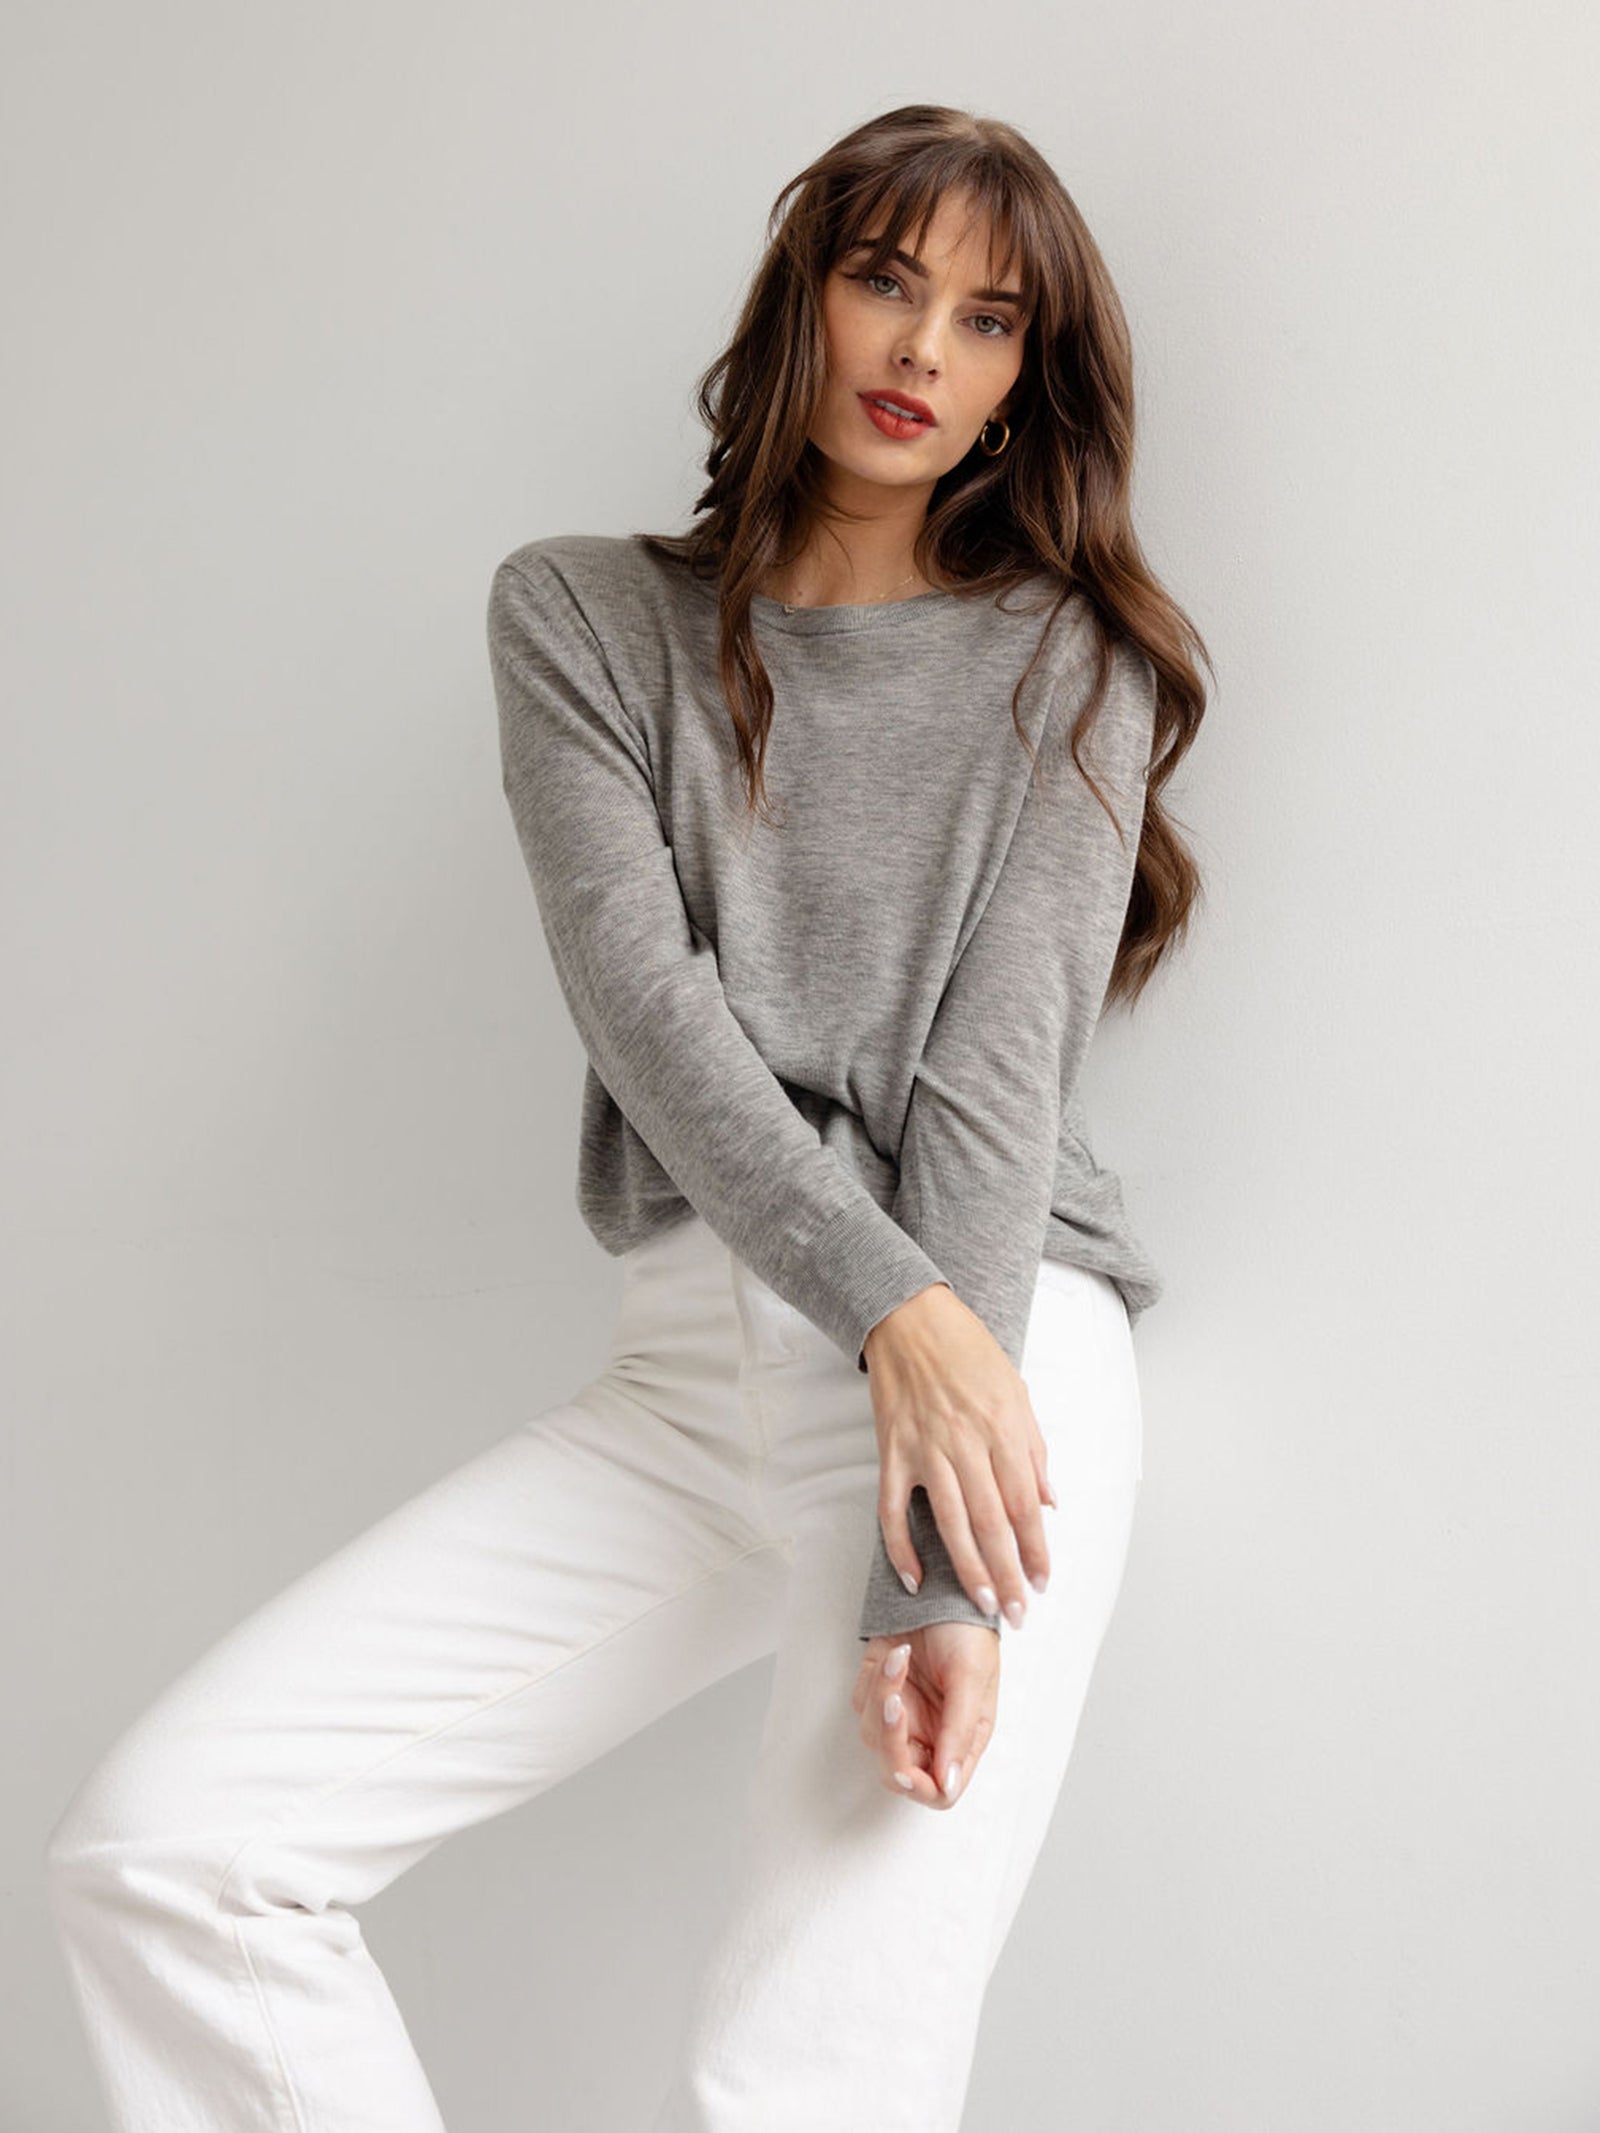 Woman leaning against wall in heather grey airknit sweater and white jeans with white background 